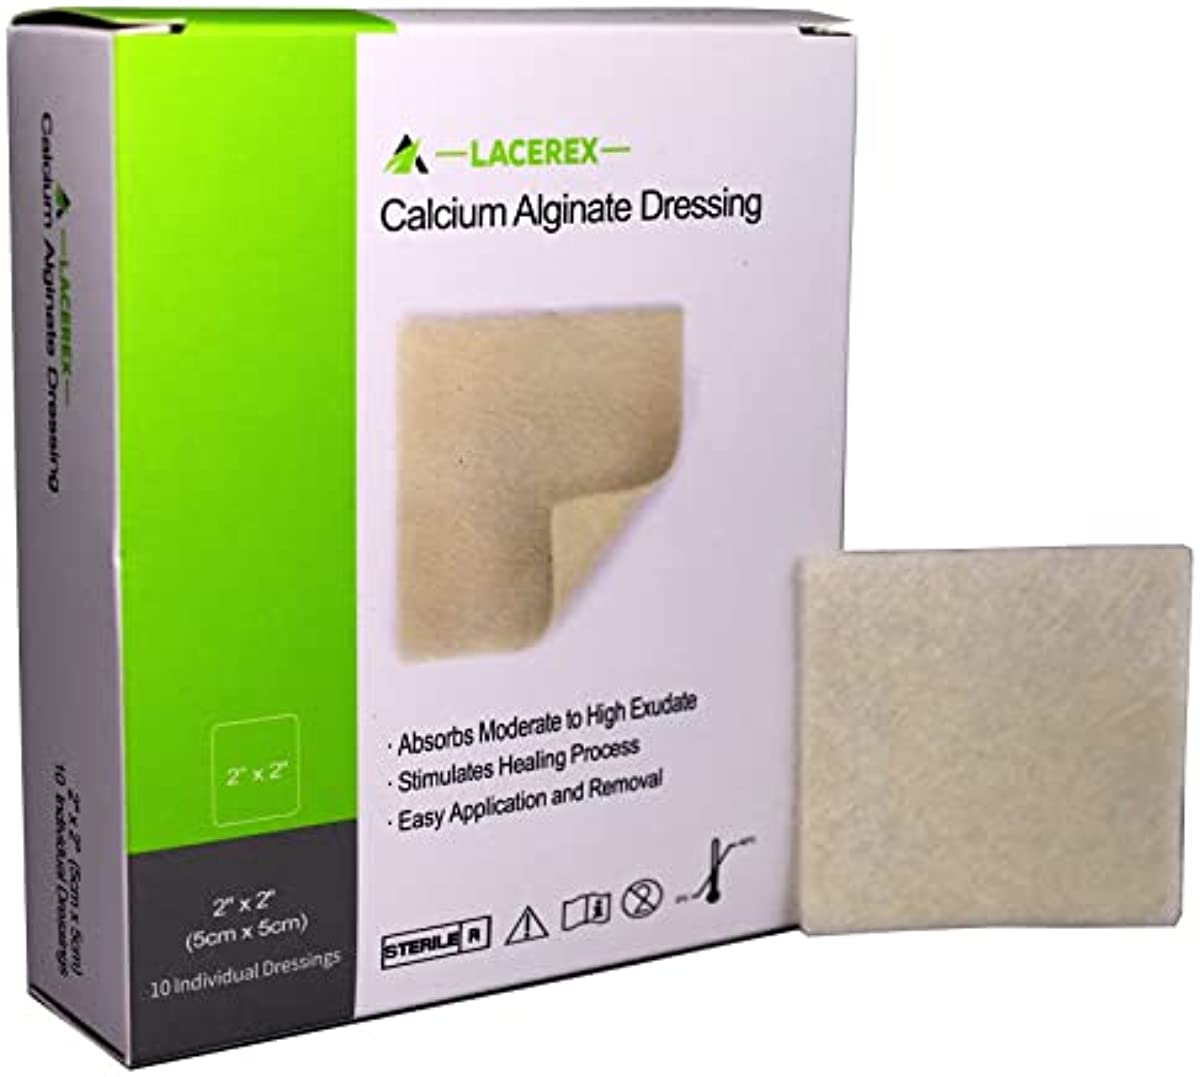 AWD Medical Calcium Alginate Wound Dressing - Highly Absorbent Gauze Pads and Wound Care Products, Quick Clotting Gauze Home & Professional Use, Medical Supplies for Wound Care - (2\" x 2\" Pads 10/Bx)